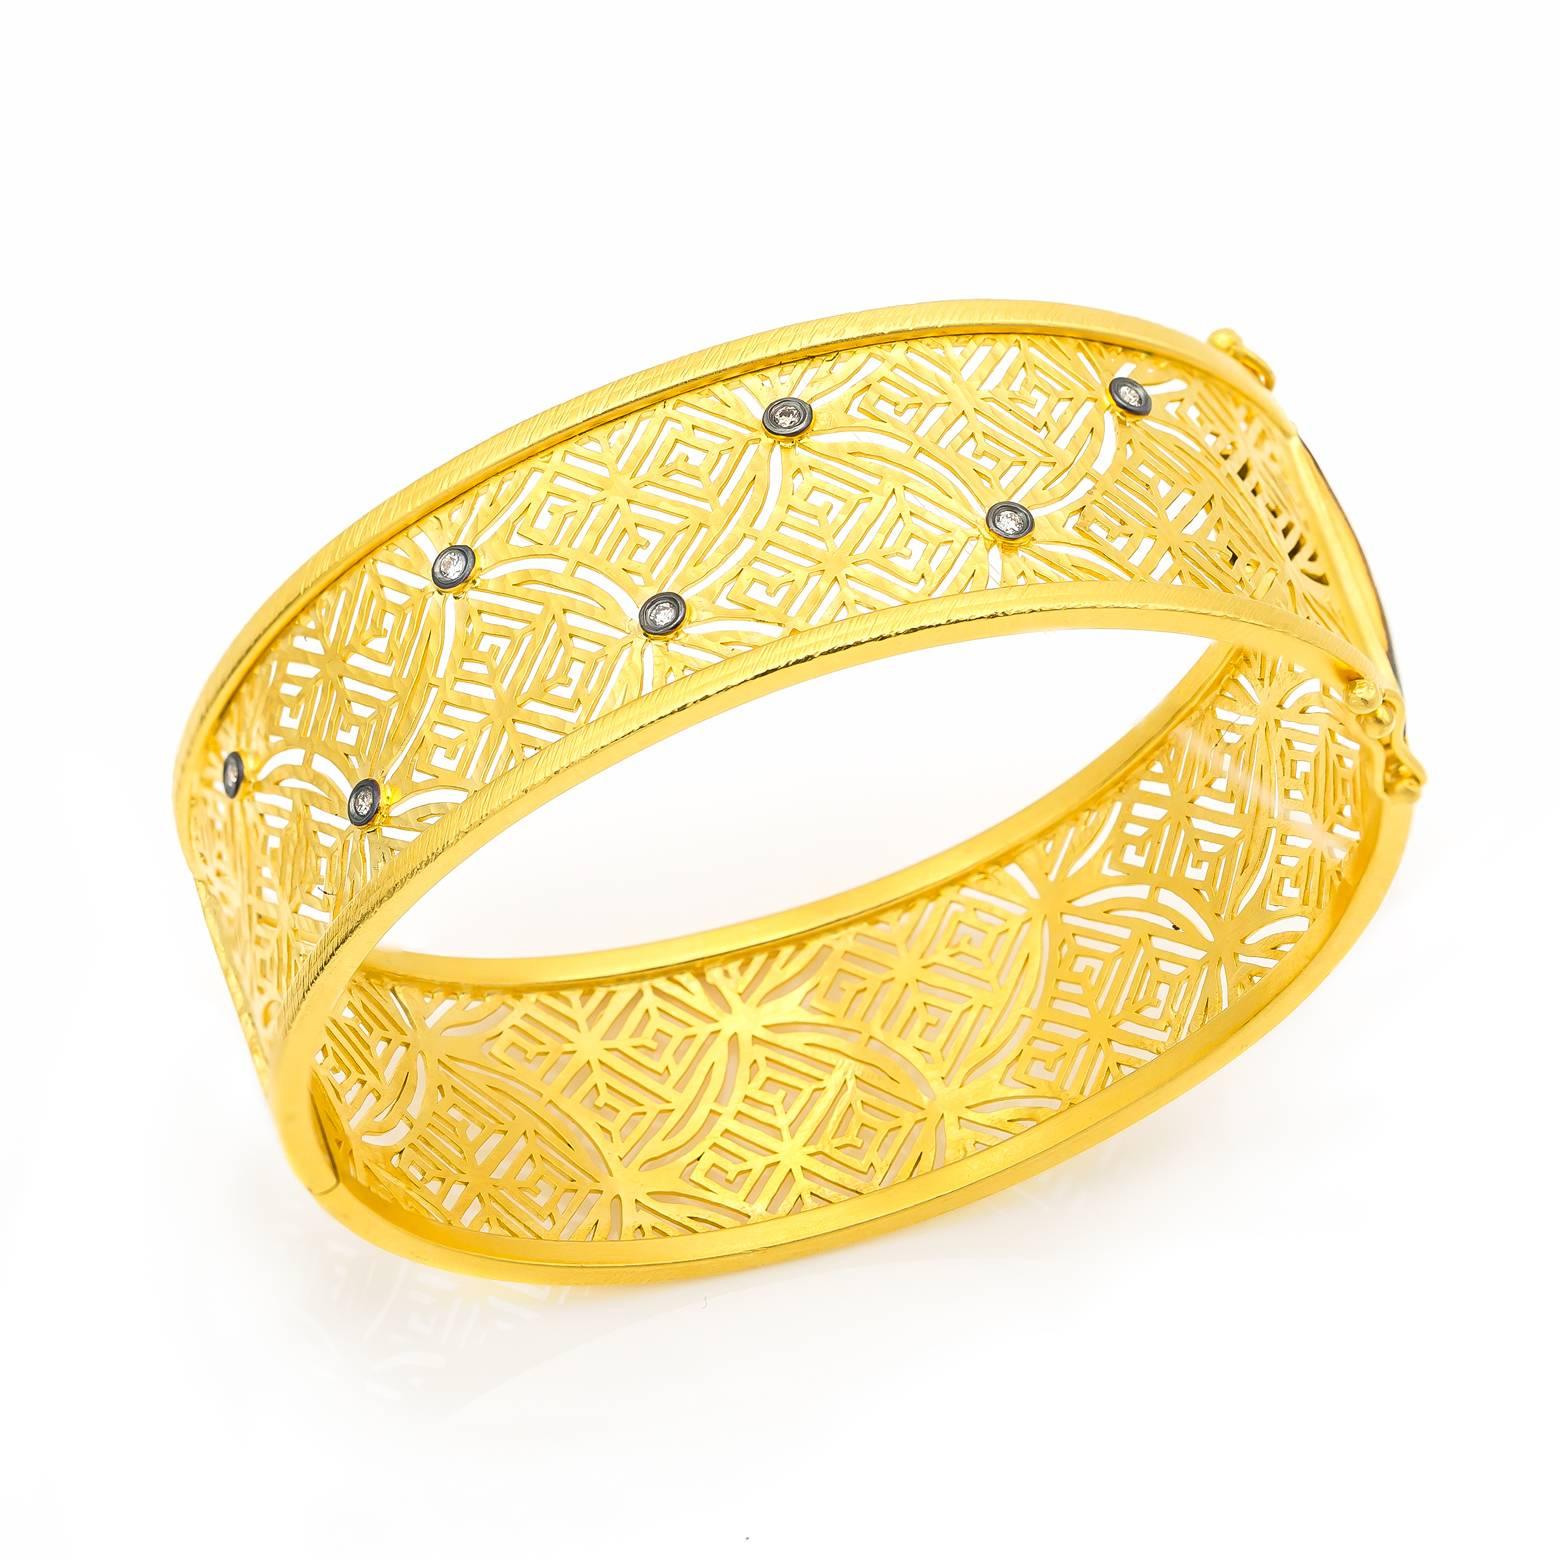 Beautiful and intricate filigree gold vermeil bracelet with oxidized sterling silver and accent diamonds. This bracelet is almost woven-like with its detail- it's gorgeous, comfortable and a must have! 